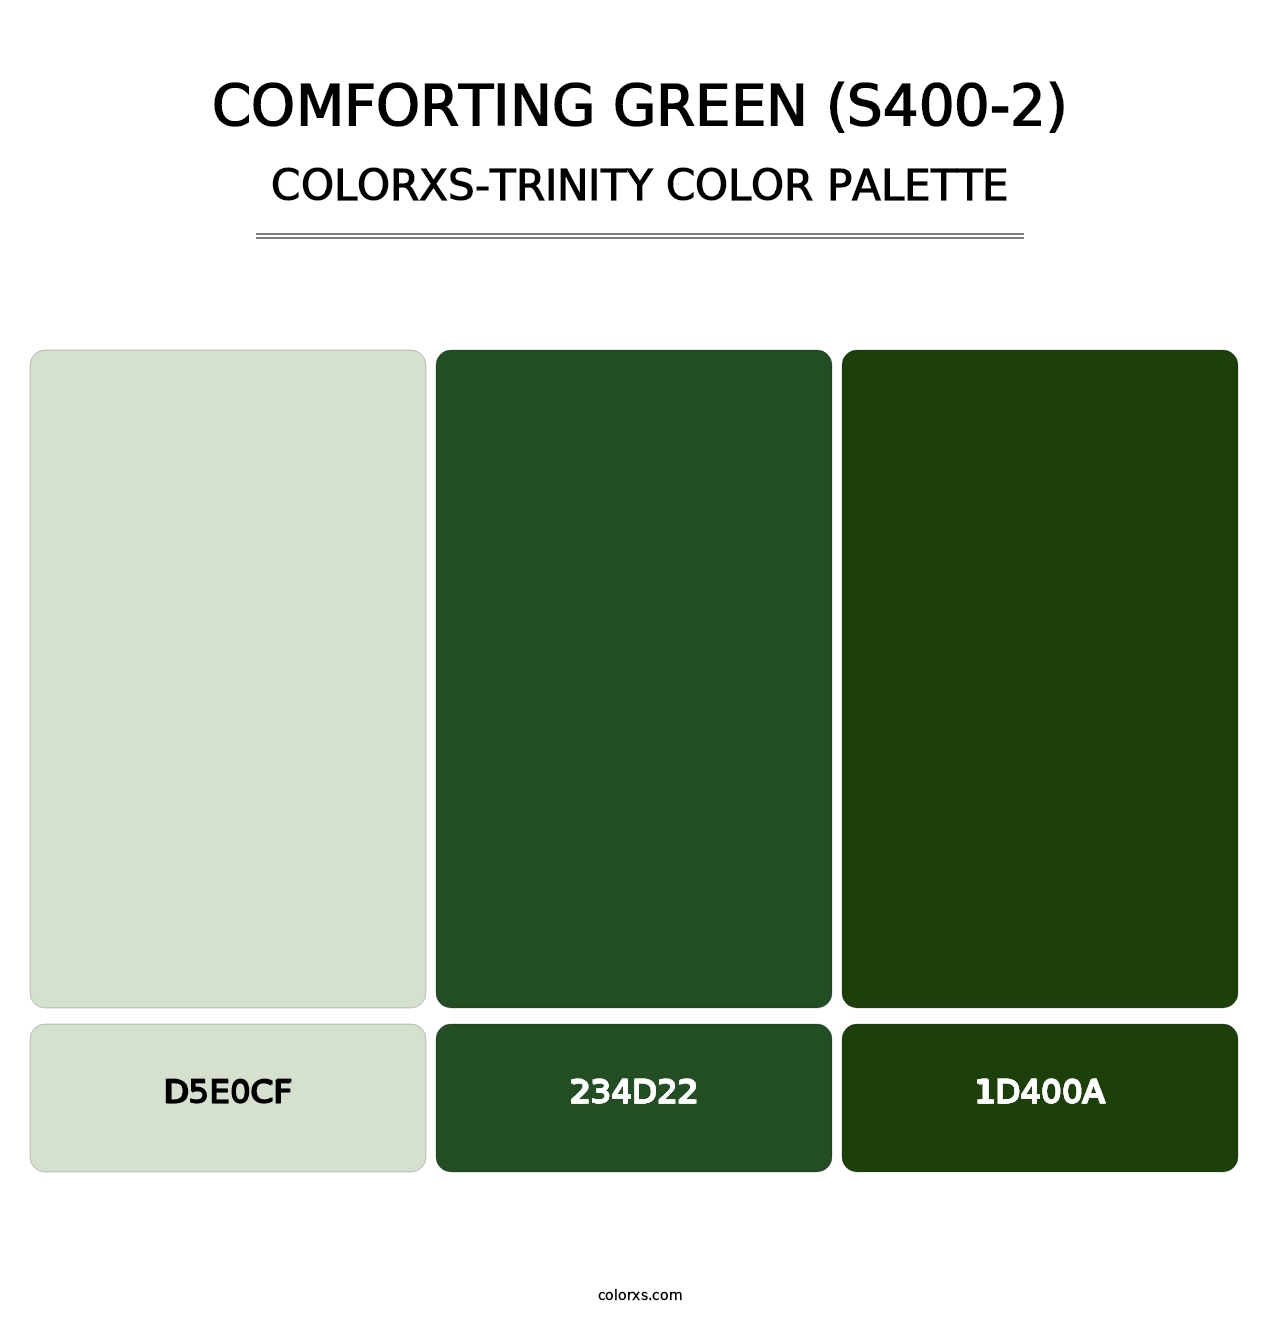 Comforting Green (S400-2) - Colorxs Trinity Palette